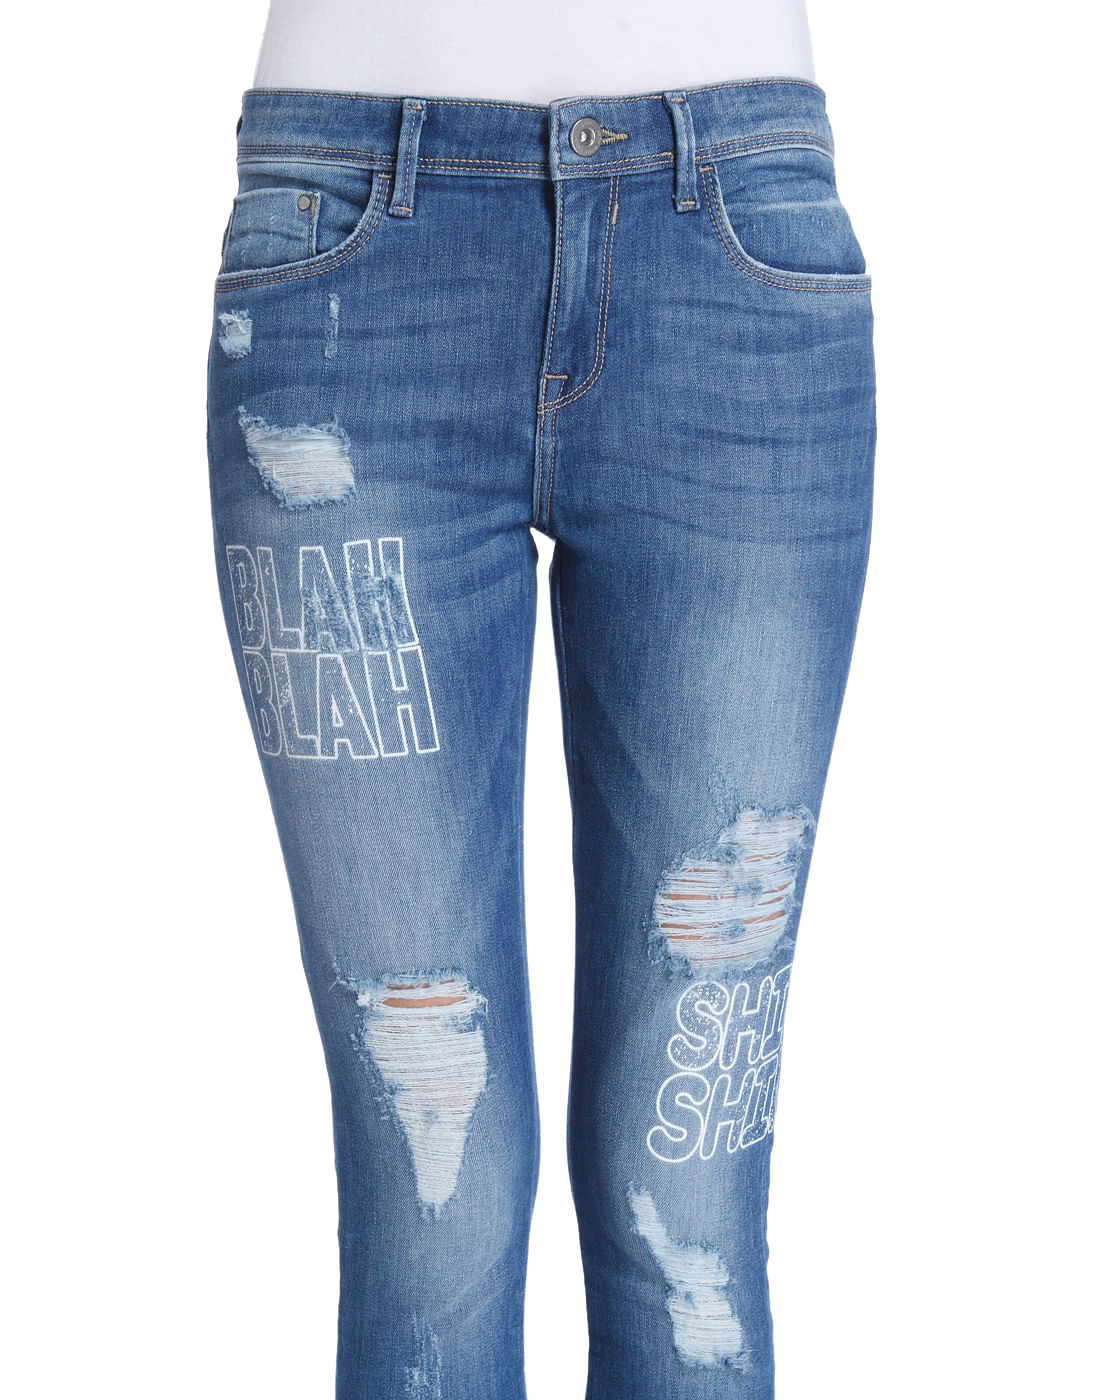 graphic skinny jeans